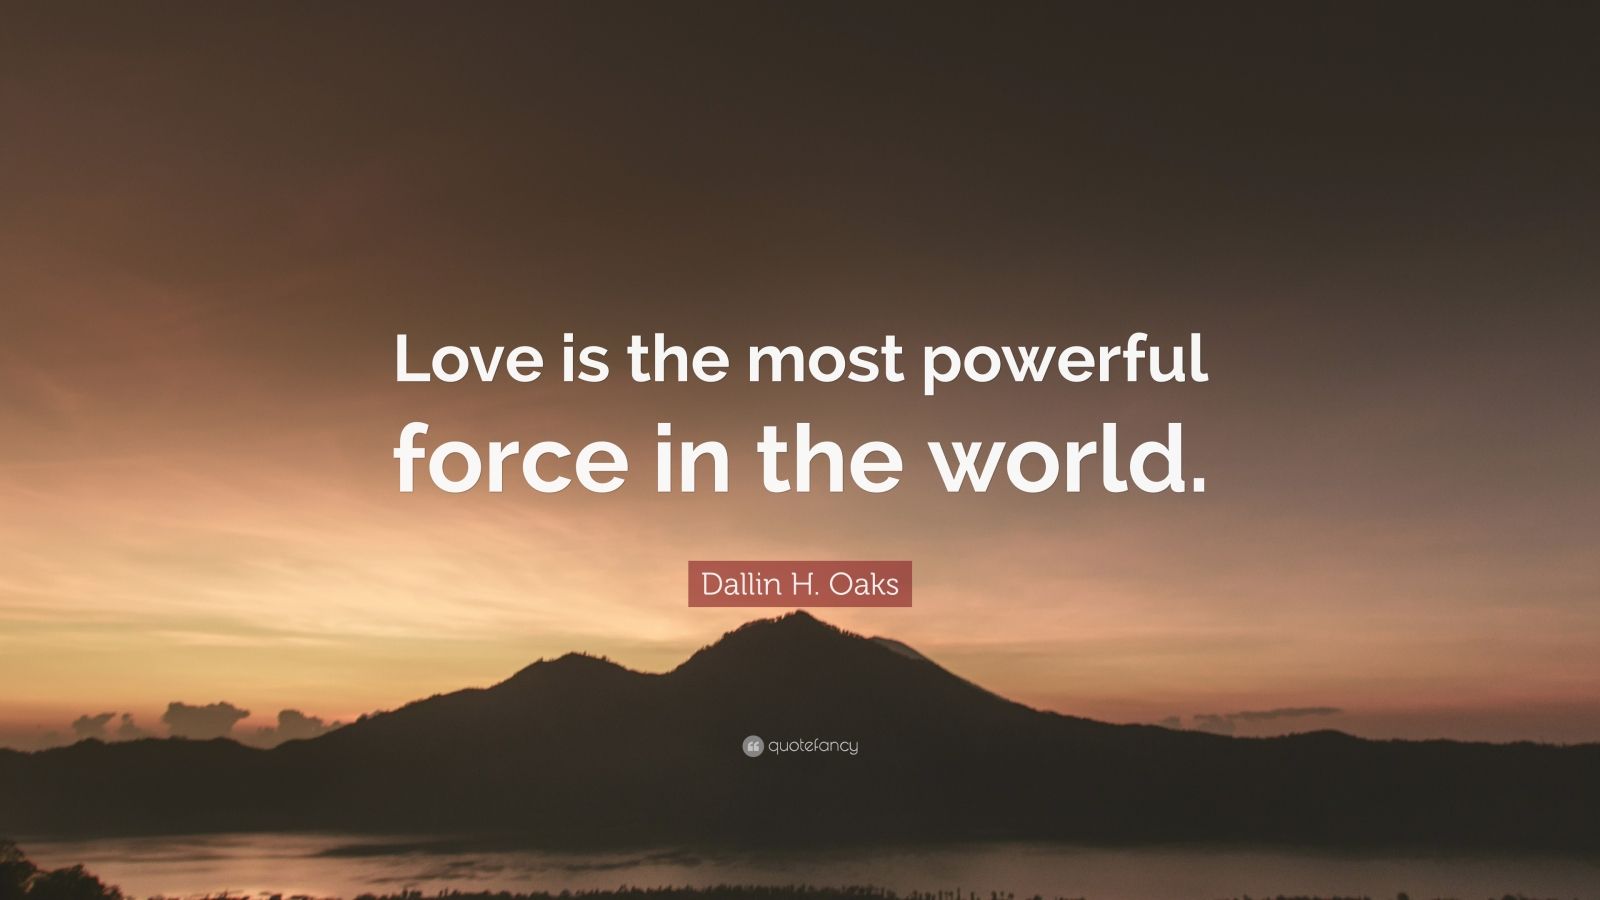 Dallin H. Oaks Quote: "Love is the most powerful force in the world." (7 wallpapers) - Quotefancy